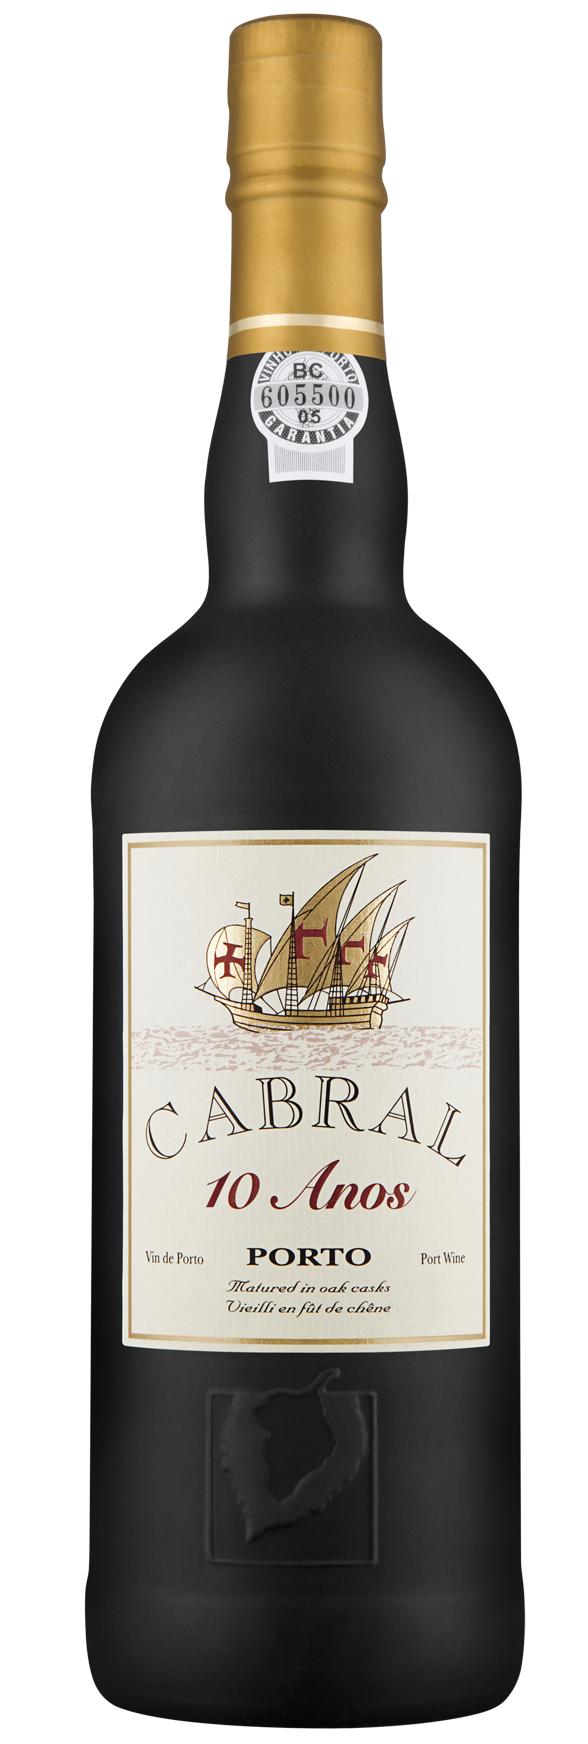 Port Cabral 10 Years Port 750 Ml Portugal